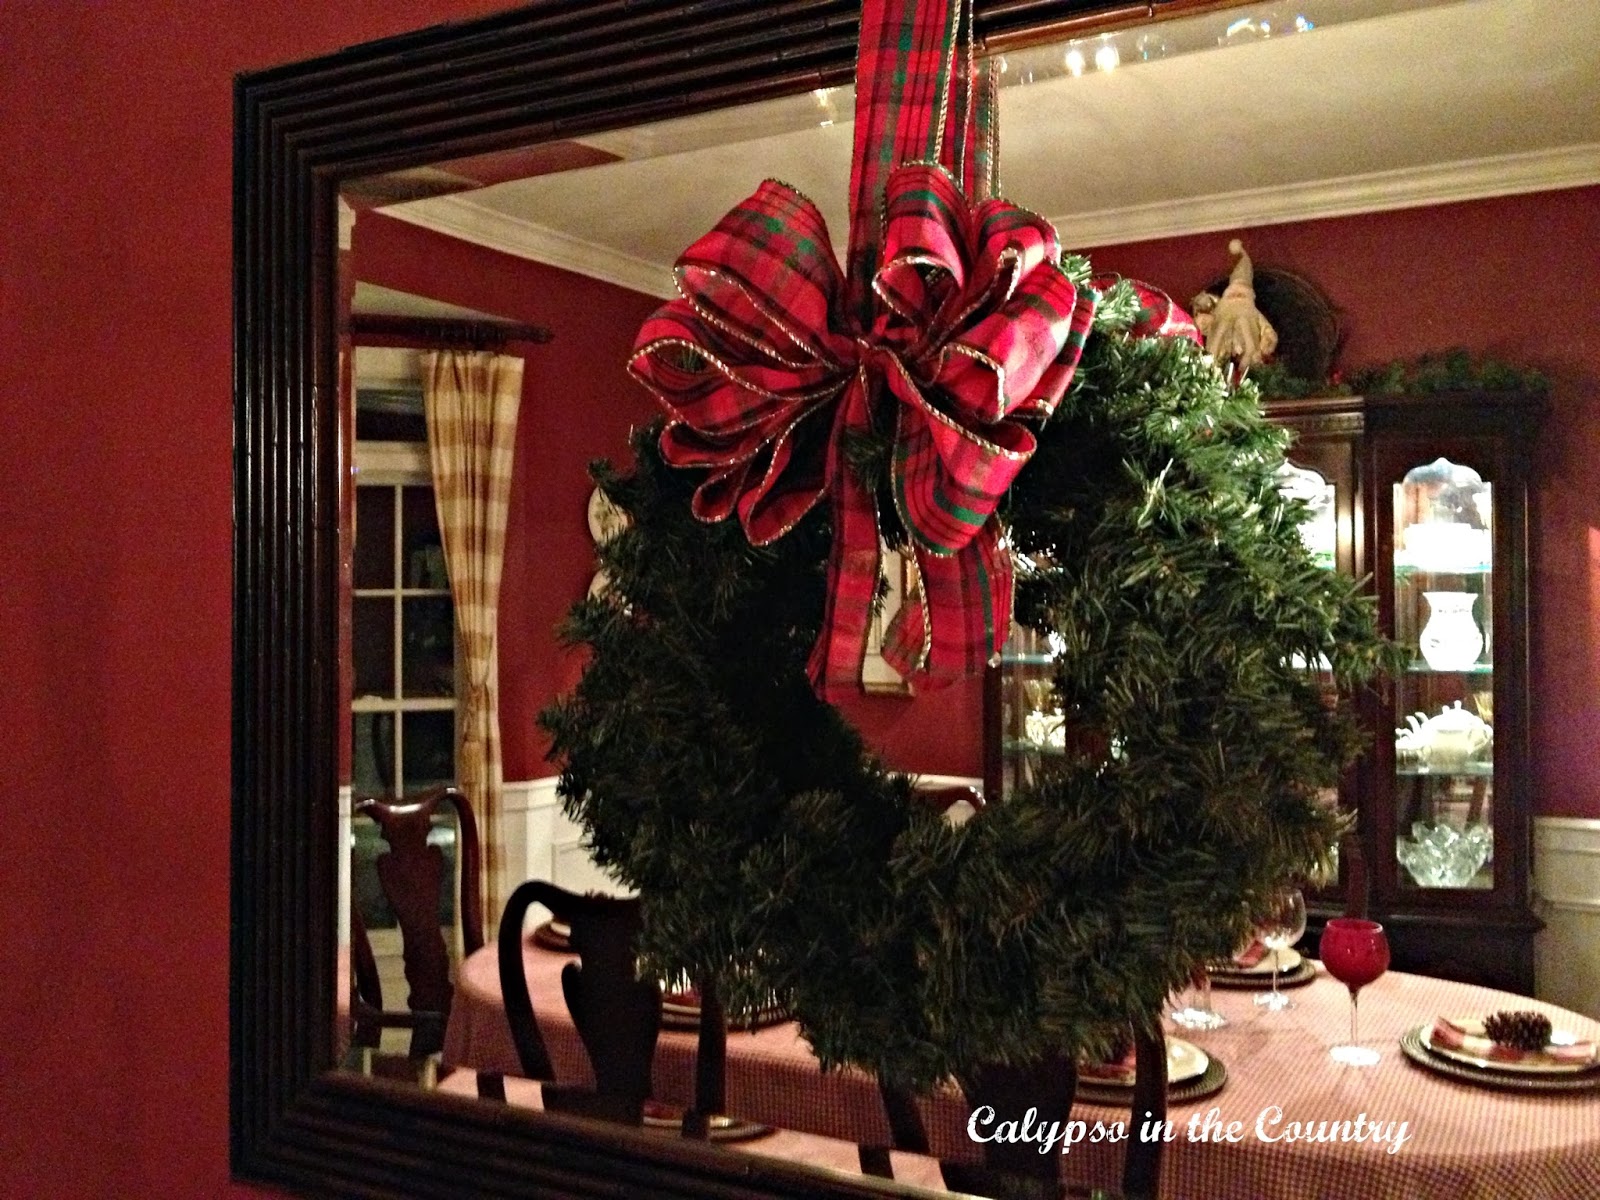 Wreath hung on mirror in dining room